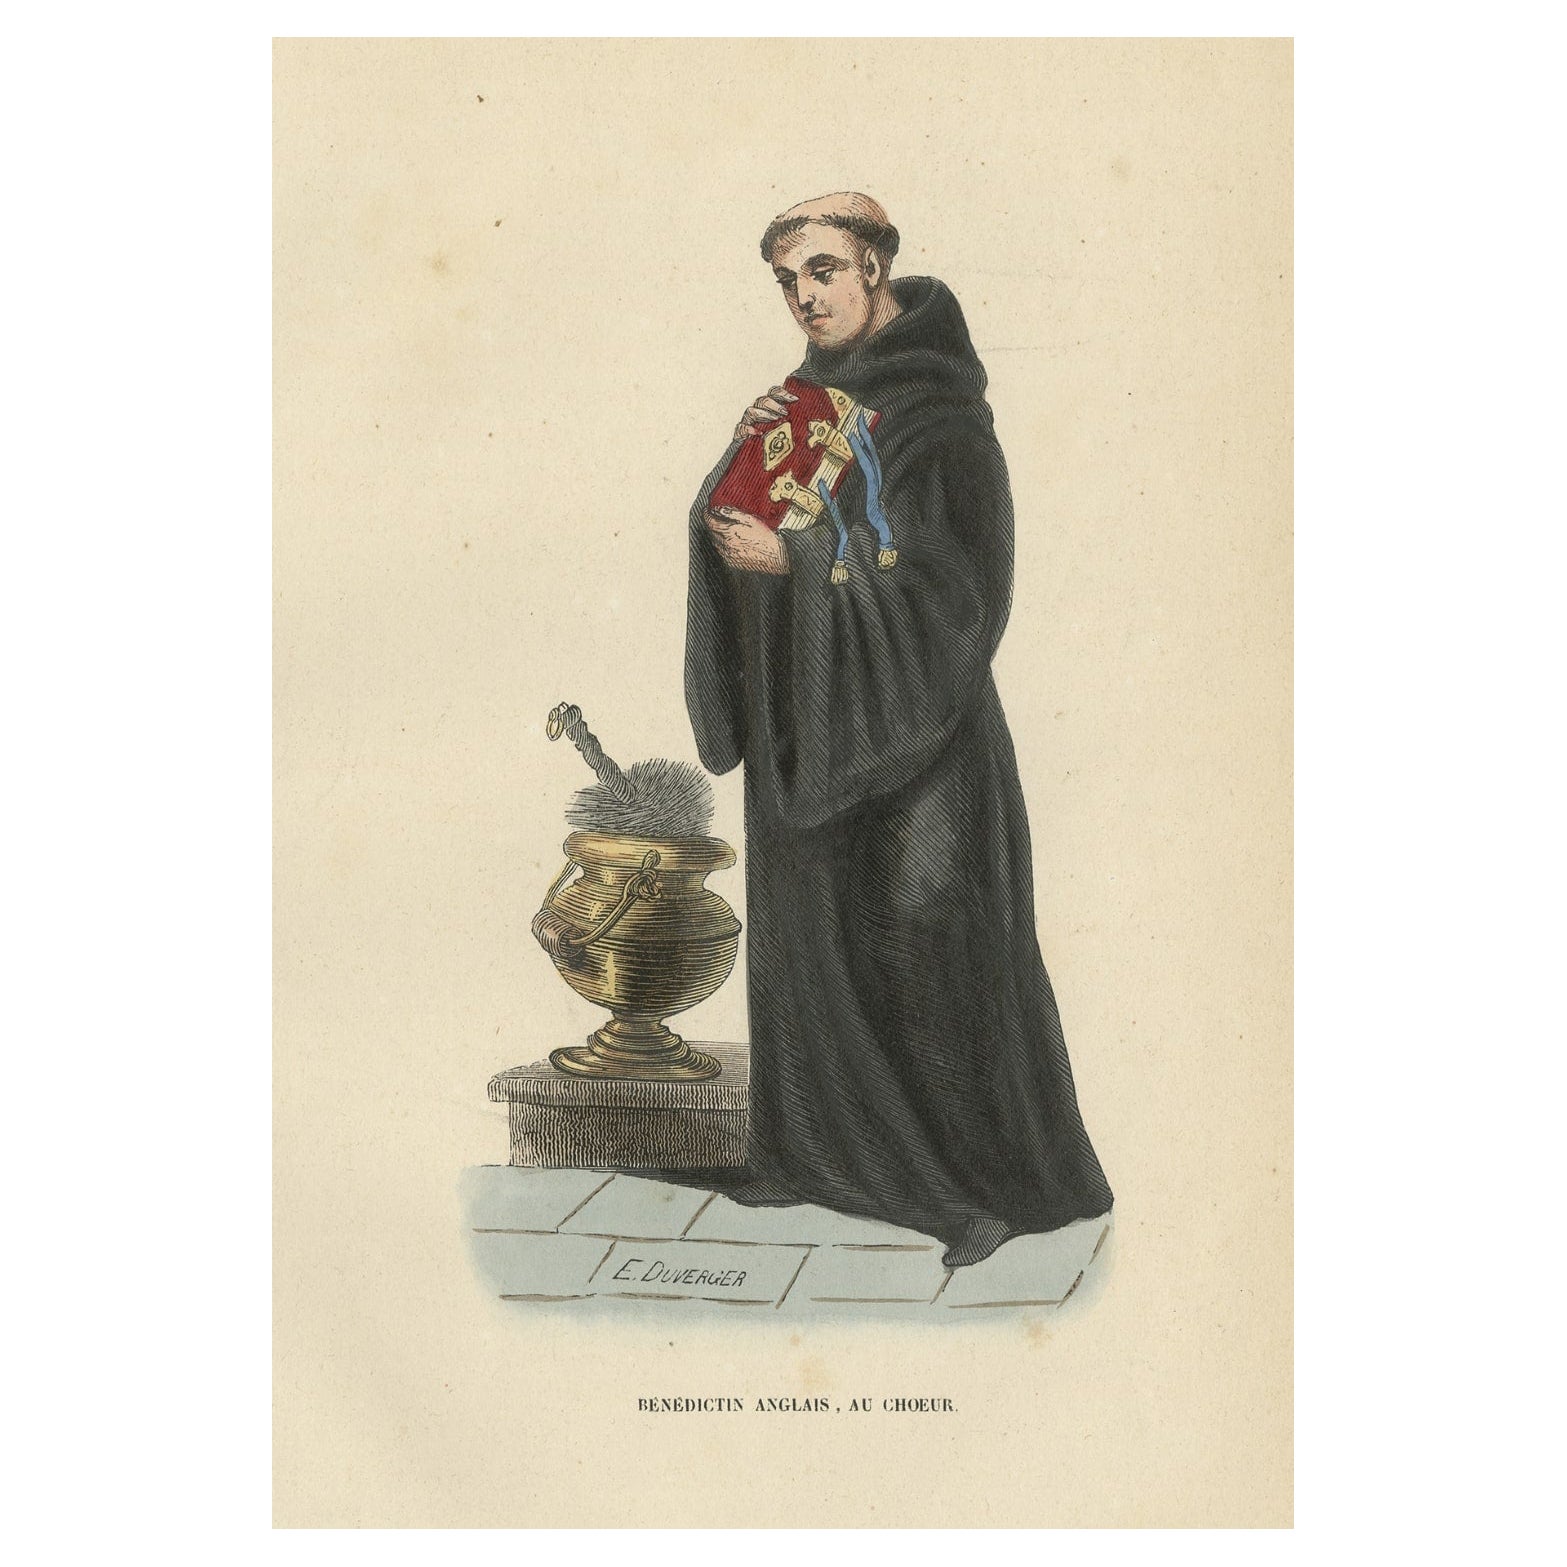 Antique Hand-colored Print of an English Benedictine in Choir Dress, 1845